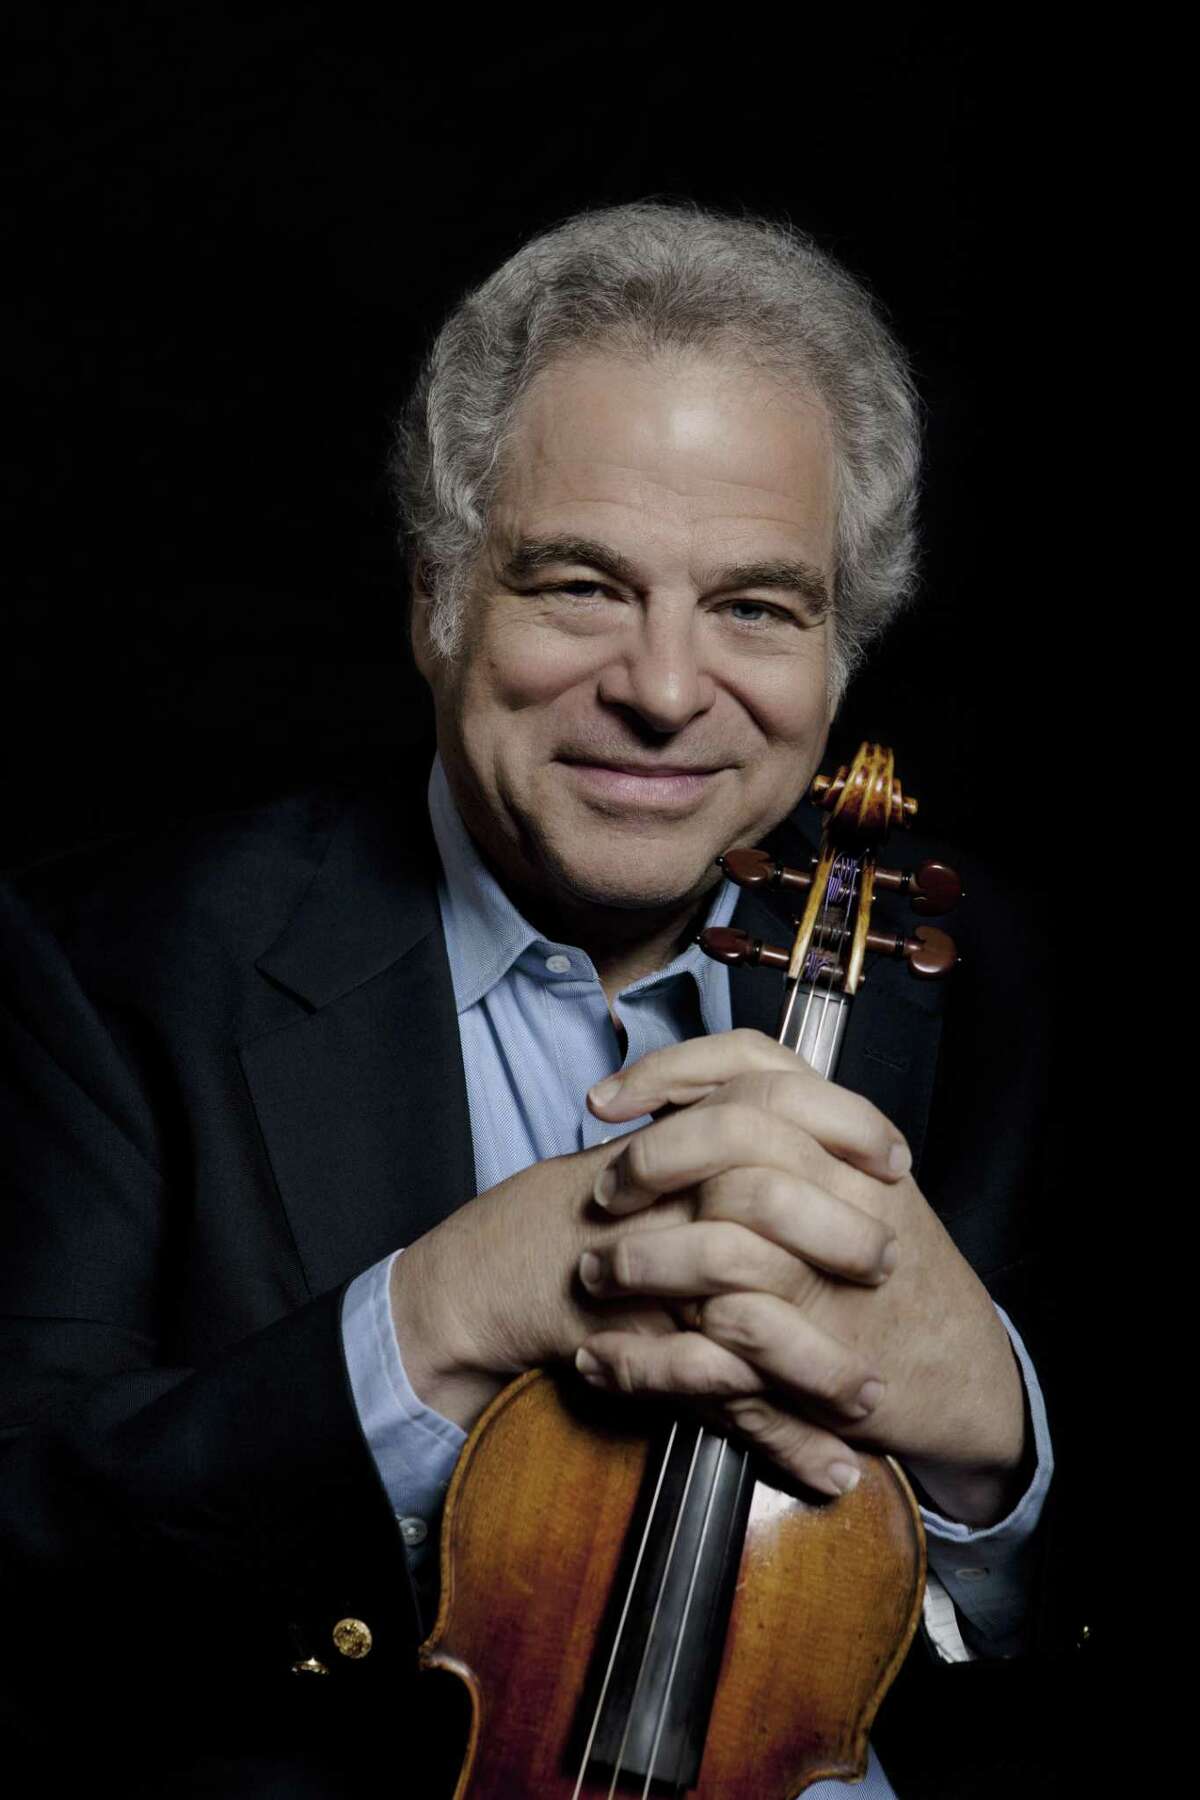 Violinist Itzhak Perlman performed a recital concert Thursday night at the Tobin Center for the Performing Arts.